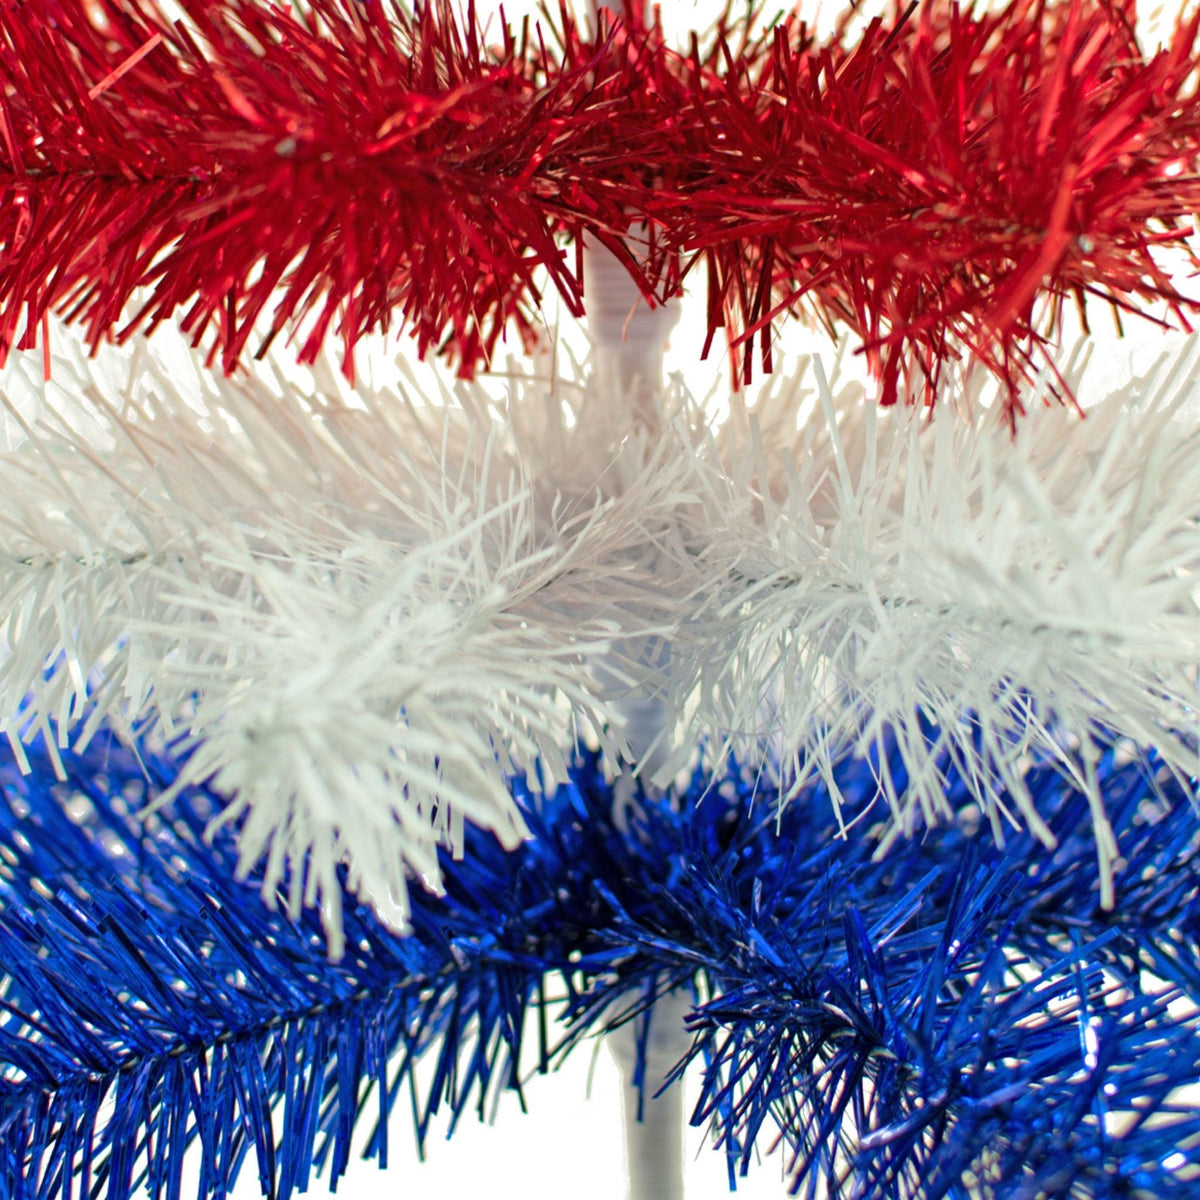 24in tall Red, White, and Blue Layered Tinsel Christmas Trees made by hand in the USA.  Decorate for the holidays with retro 4th of July-themed Trees and start creating your centerpiece now.  Shop for more at leedisplay.com